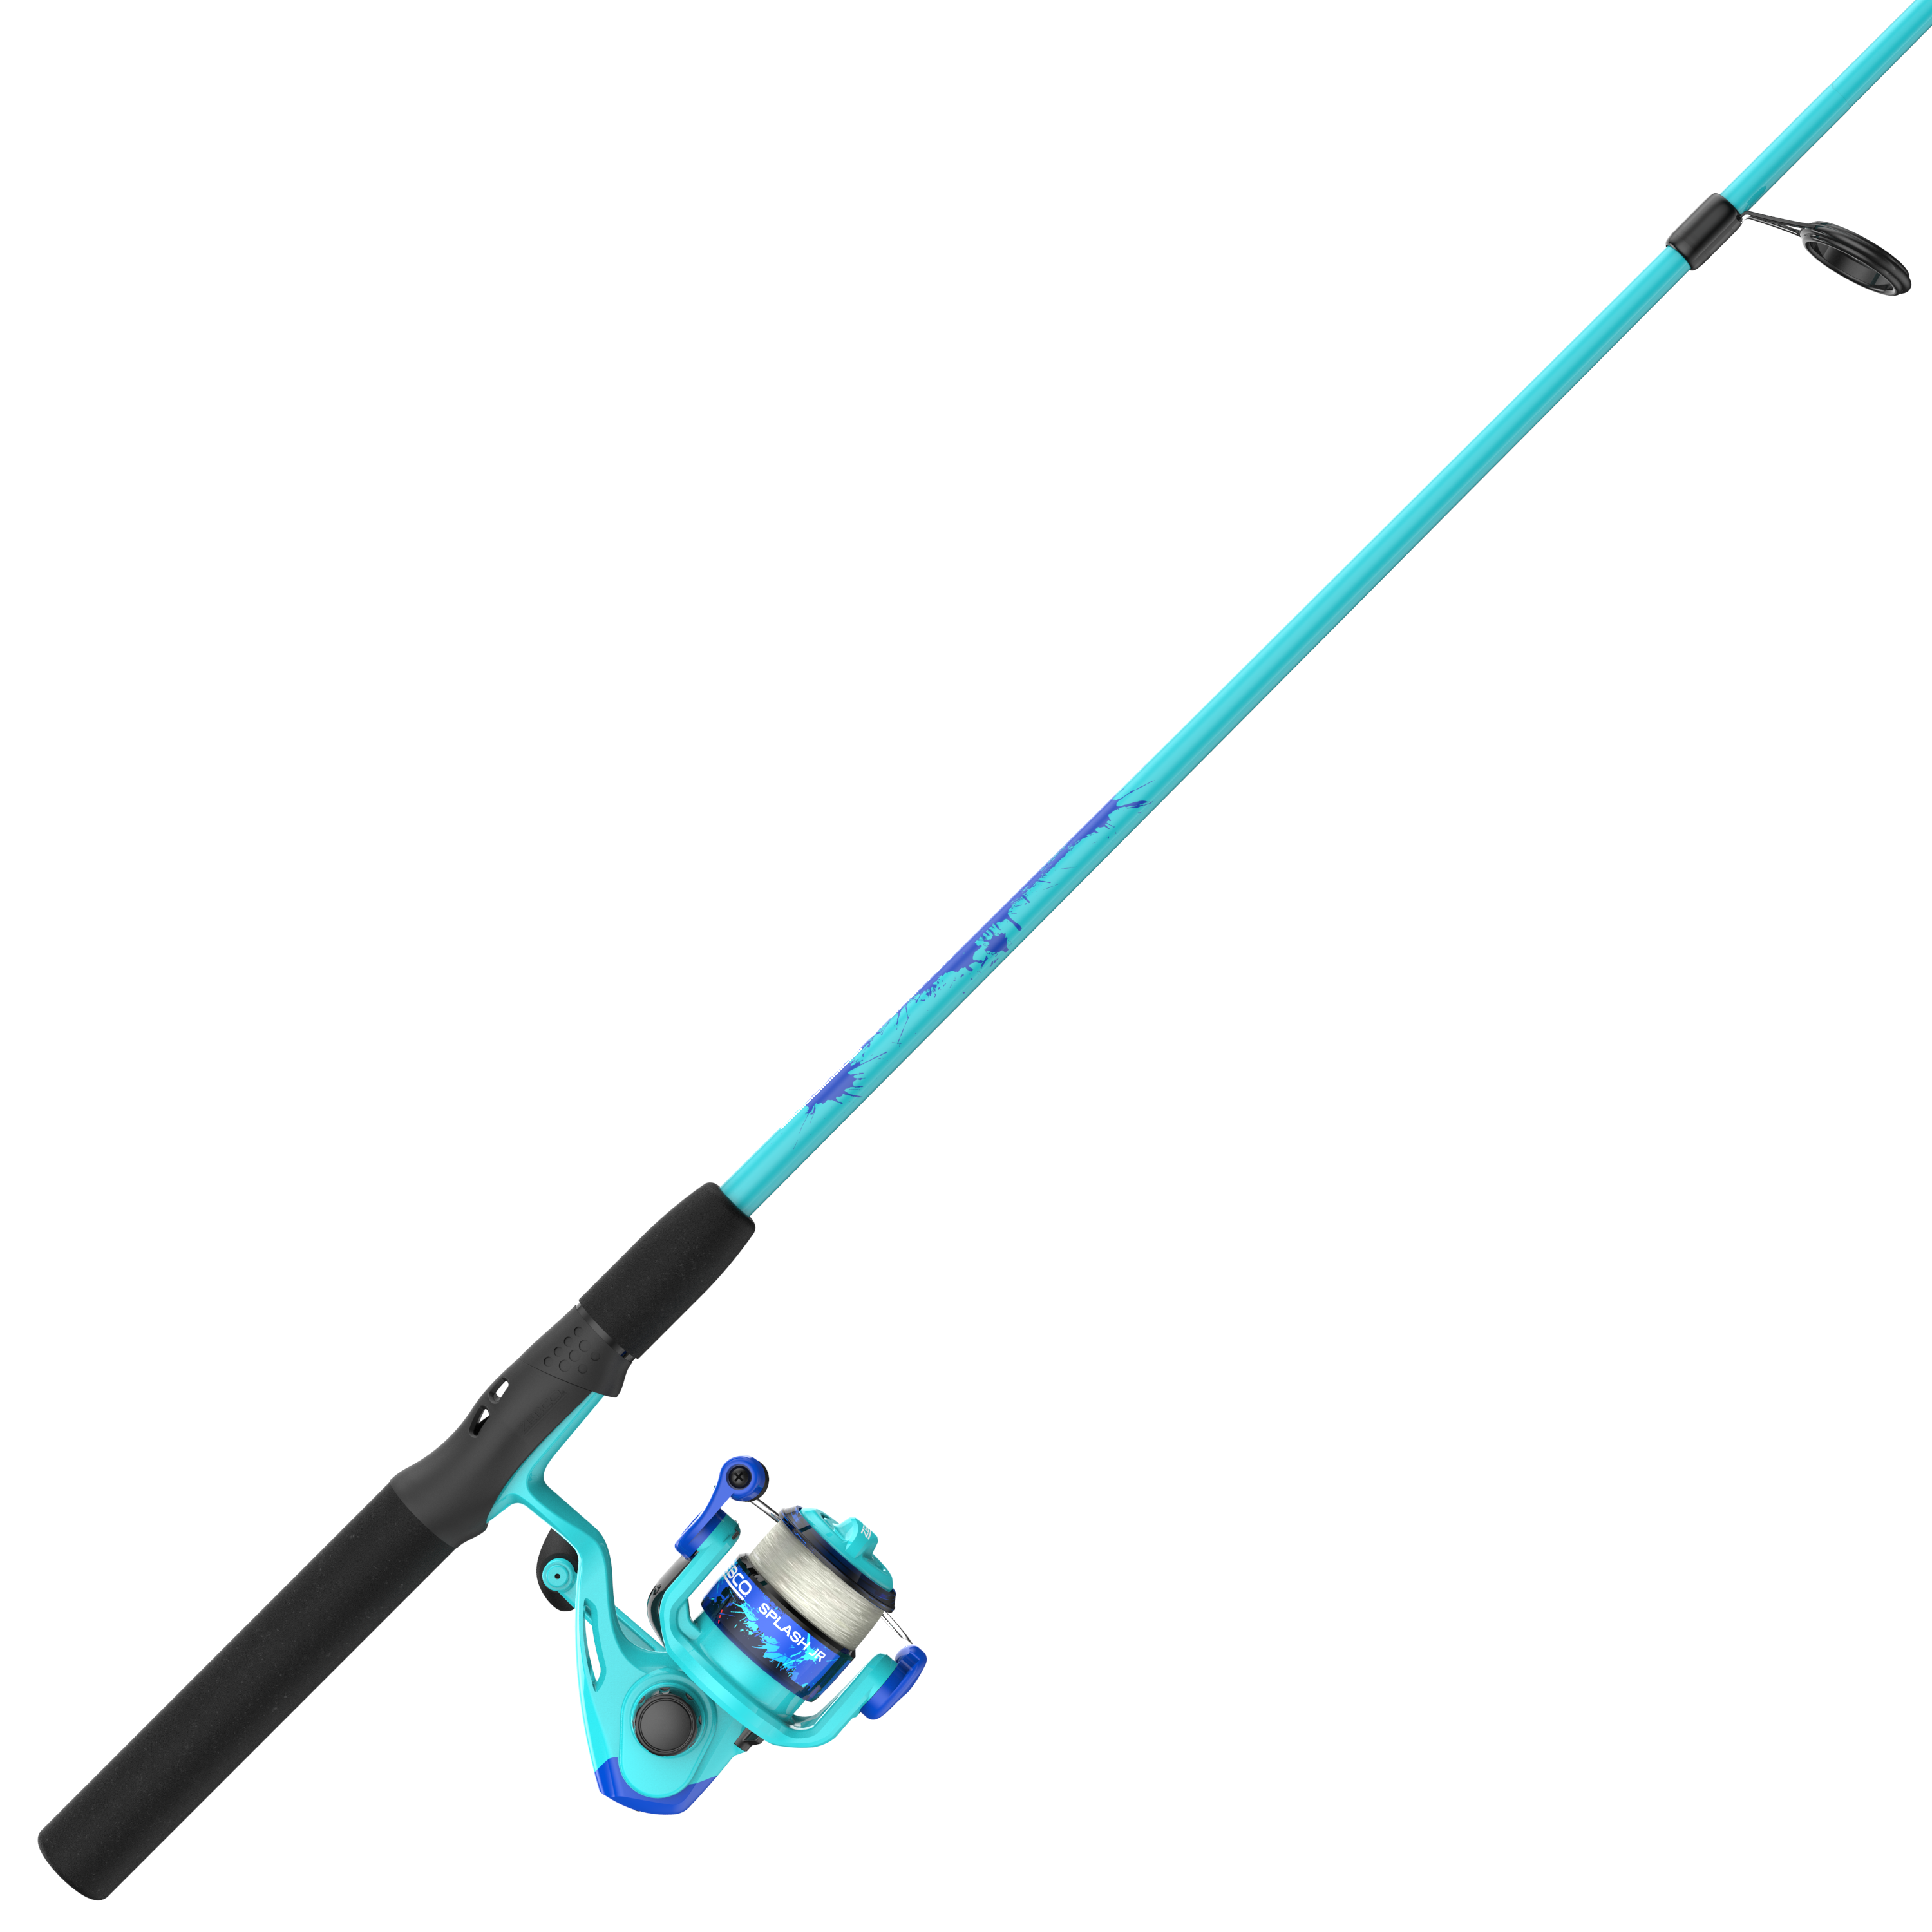  Kids Splash Floating Spincast Reel And Fishing Rod Combos  For Ages 3-9